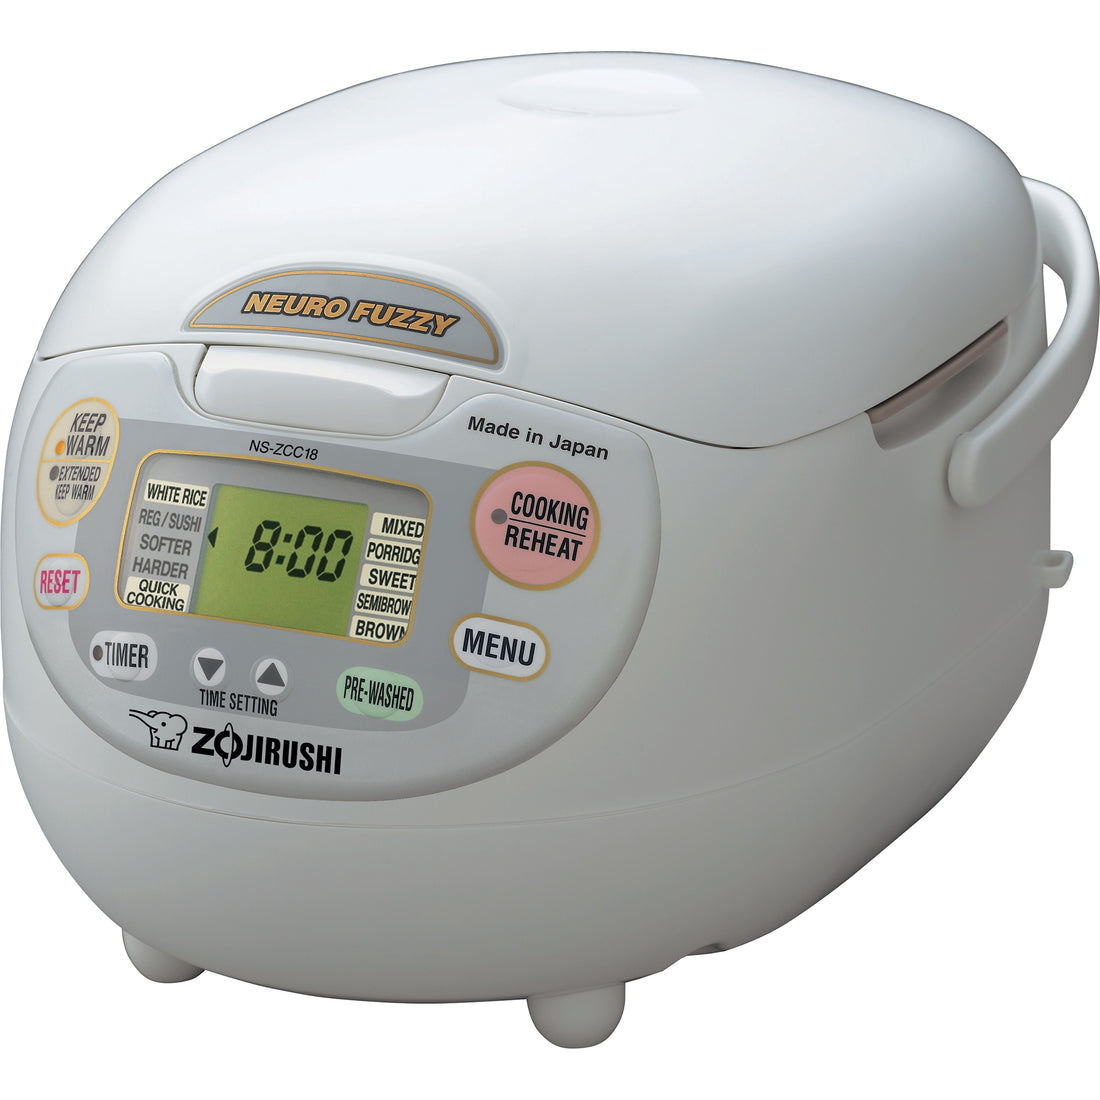 Toshiba Rice Cooker From $76.99